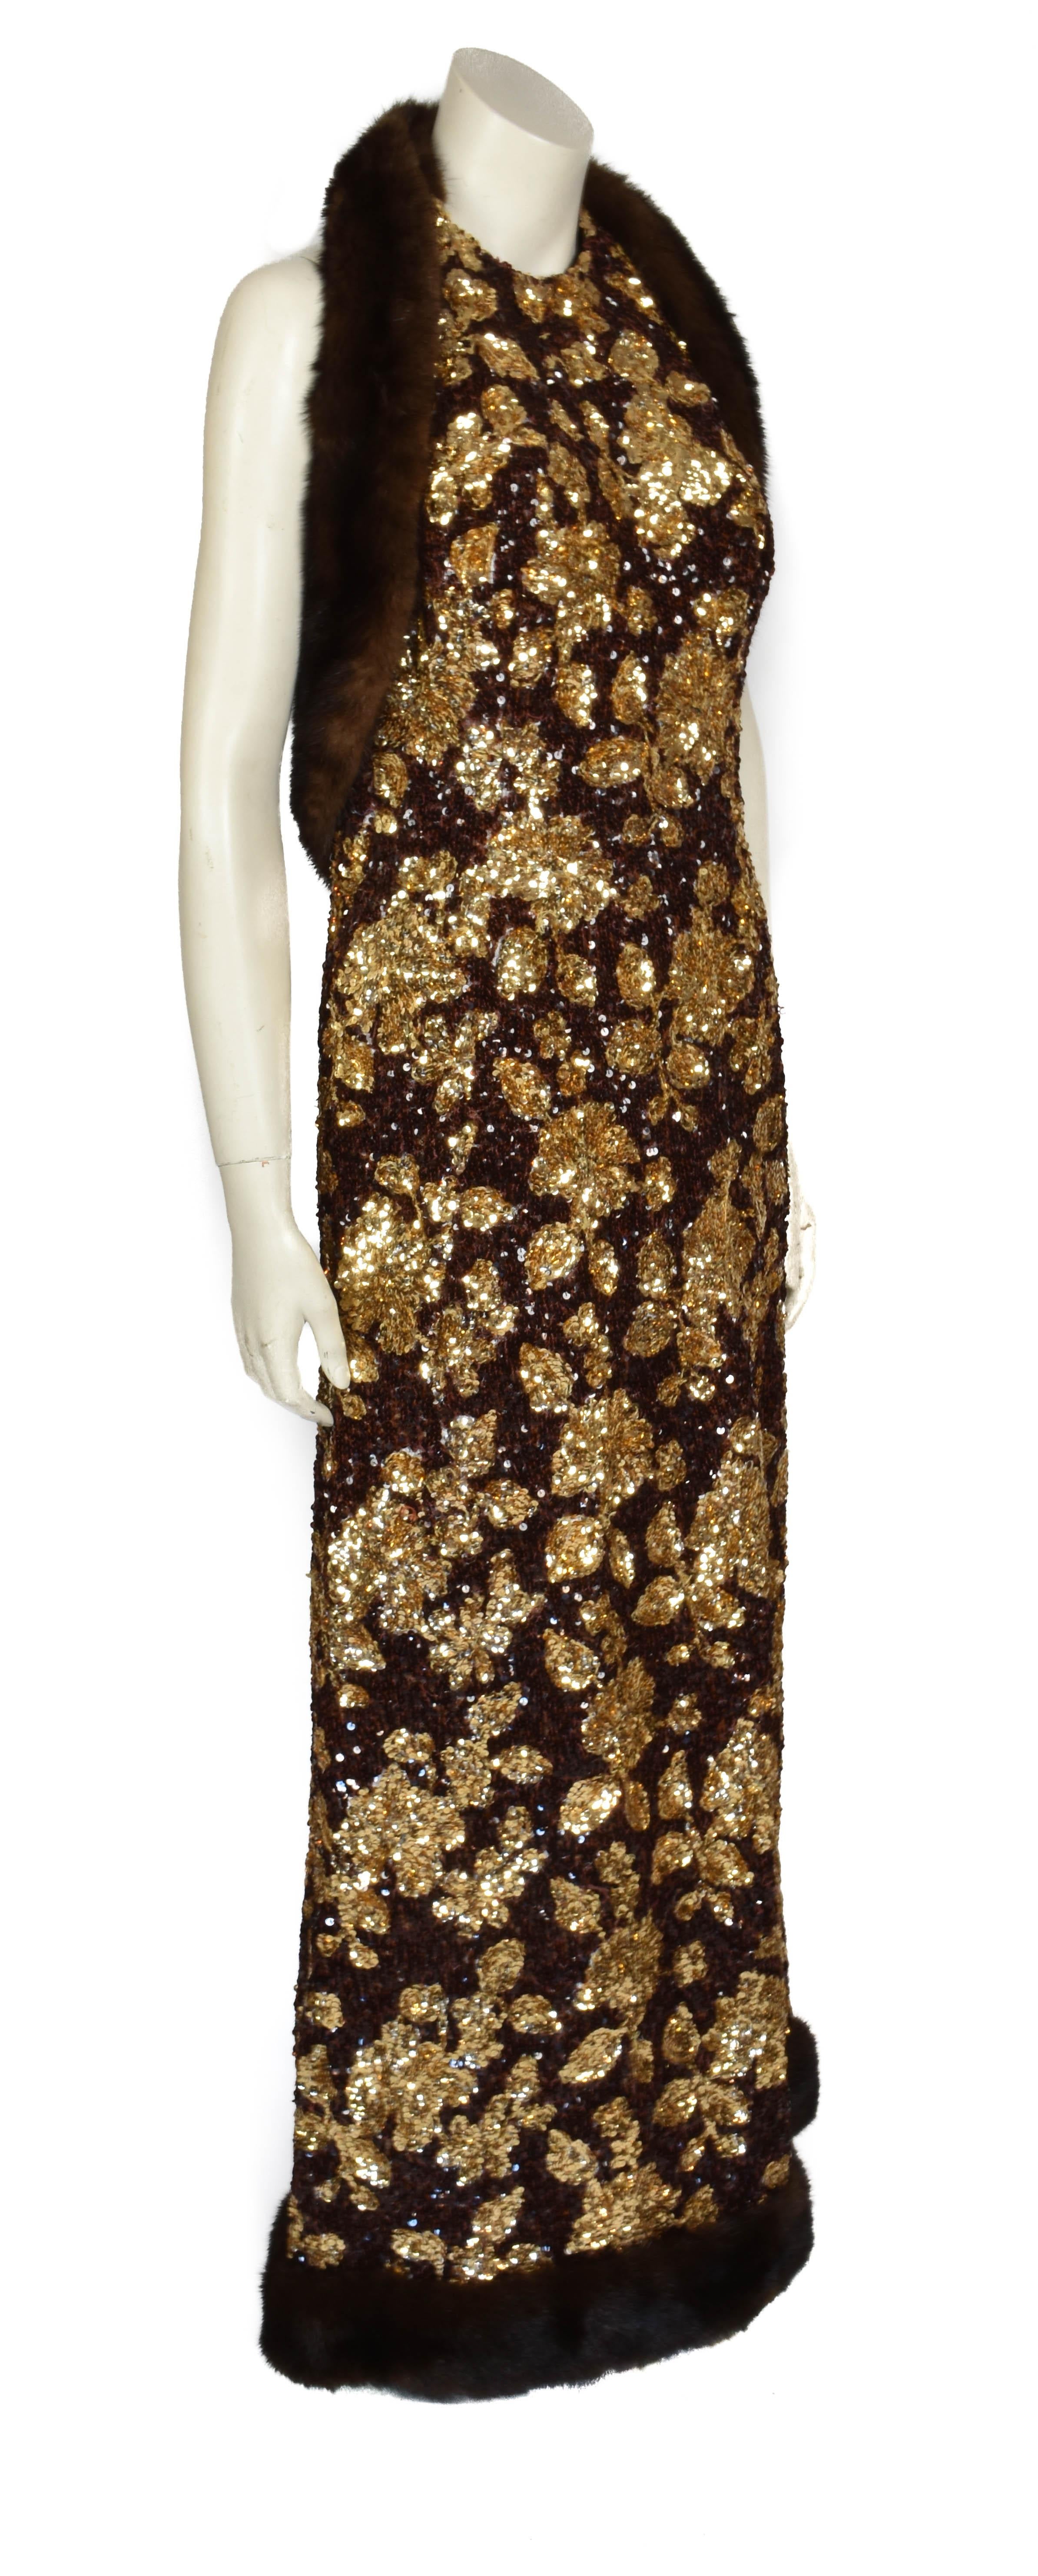 This exceptional evening gown by Jacques Heim is entirely covered in brown and gold sparkling sequins and has a fluffy fur trim. It is a true Haute Couture masterpiece dating back to the early 1960's. This vintage evening gown is extremely well